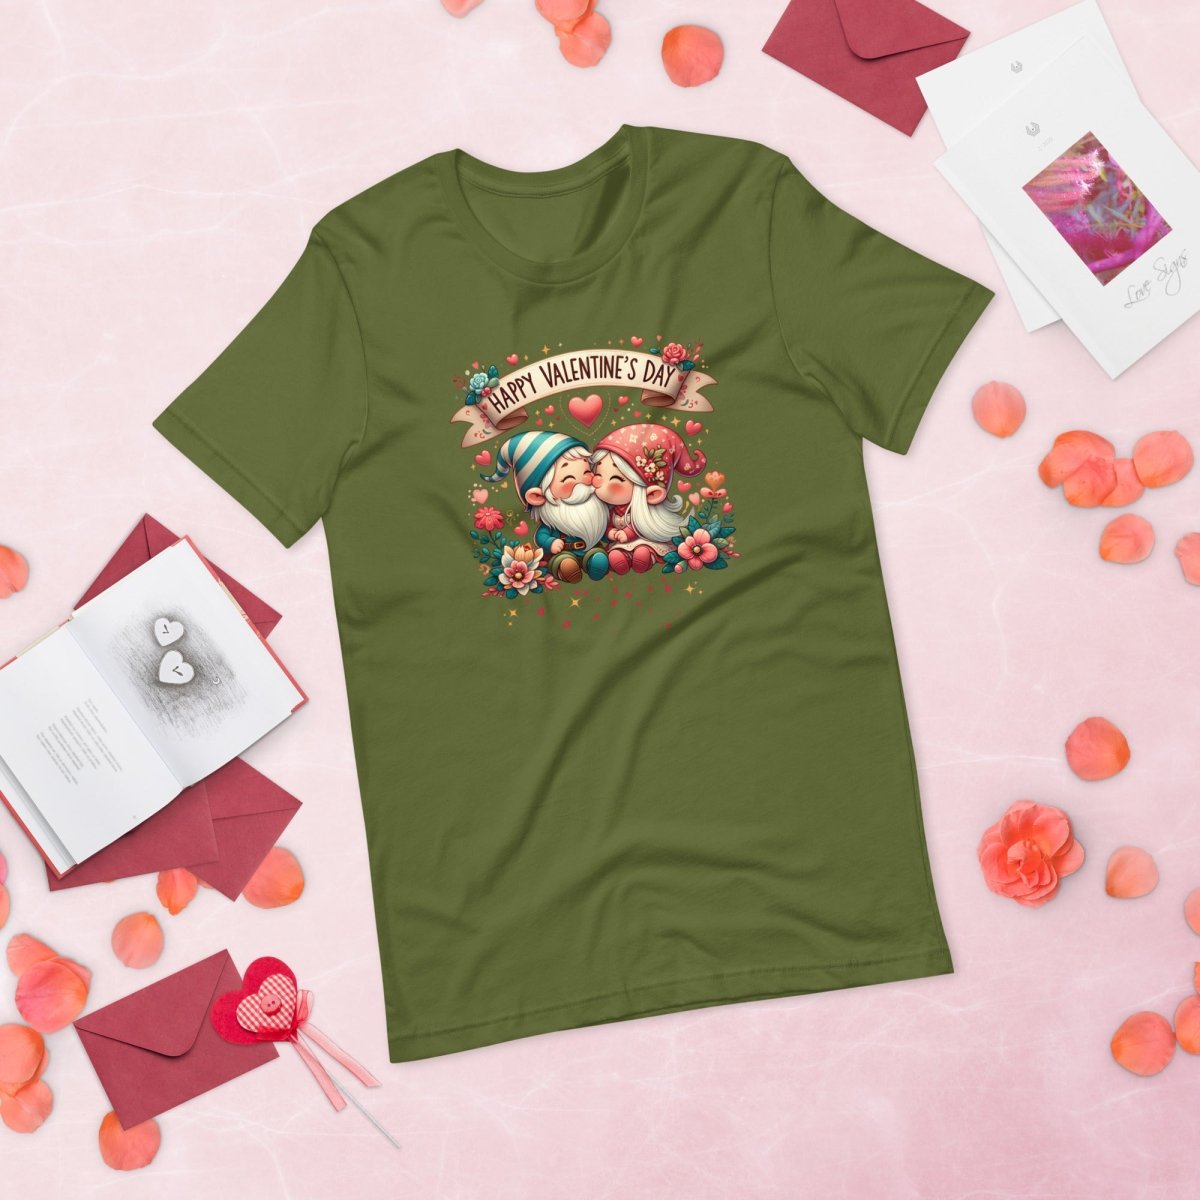 Cute Gnome Valentine T-Shirt High Quality Funny Valentines Day Shirt Love Gift for Her Love Tee Cute Couple Anniversary Shirt Gnomie Design - Everything Pixel